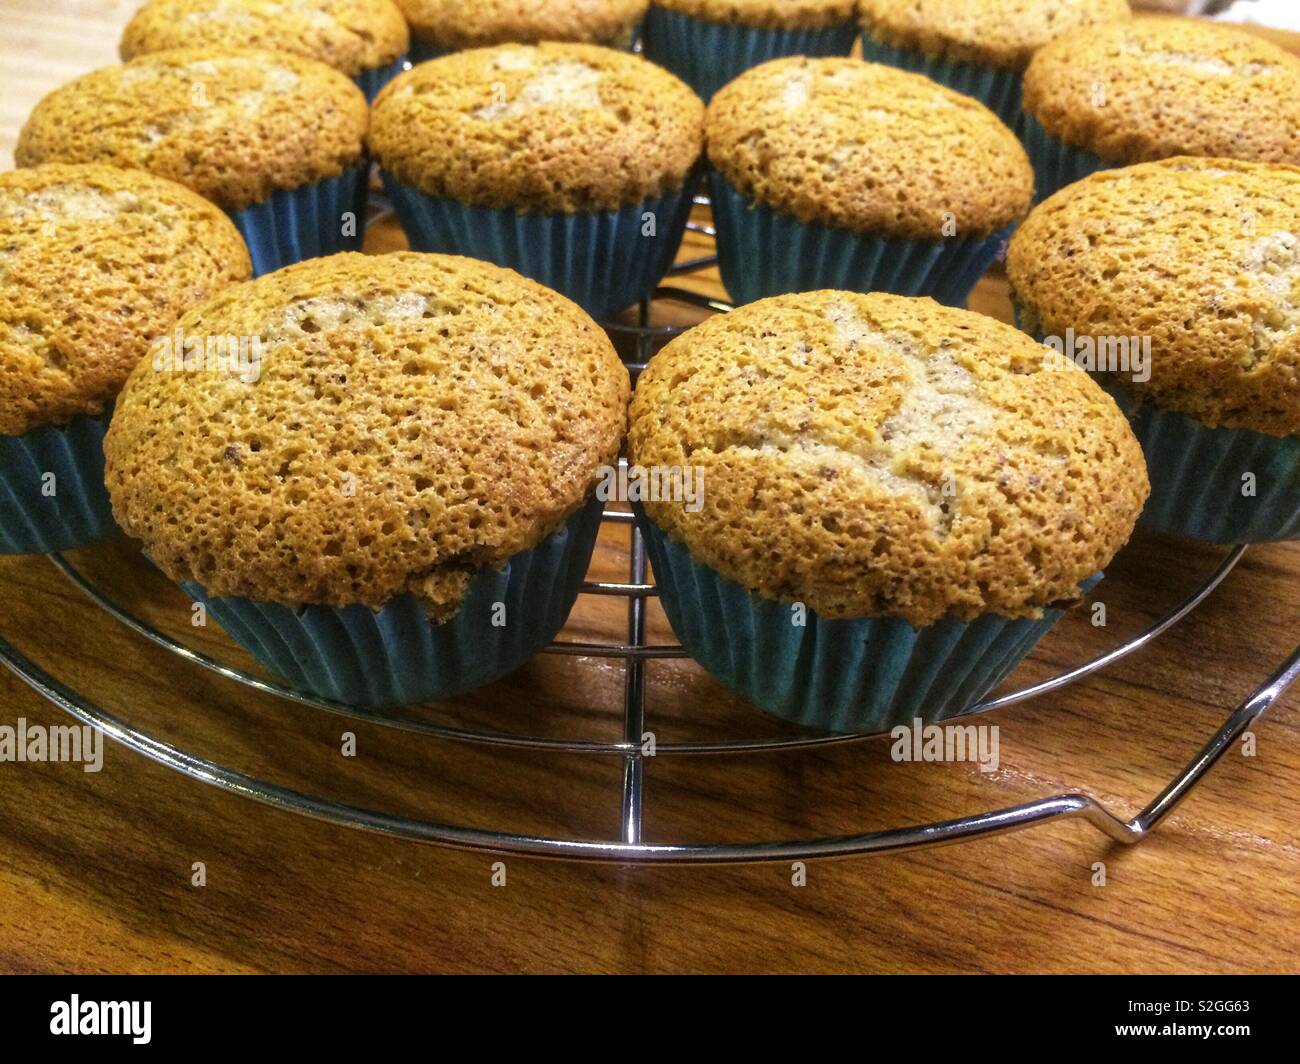 Home made Gluten free Cupcakes Stock Photo